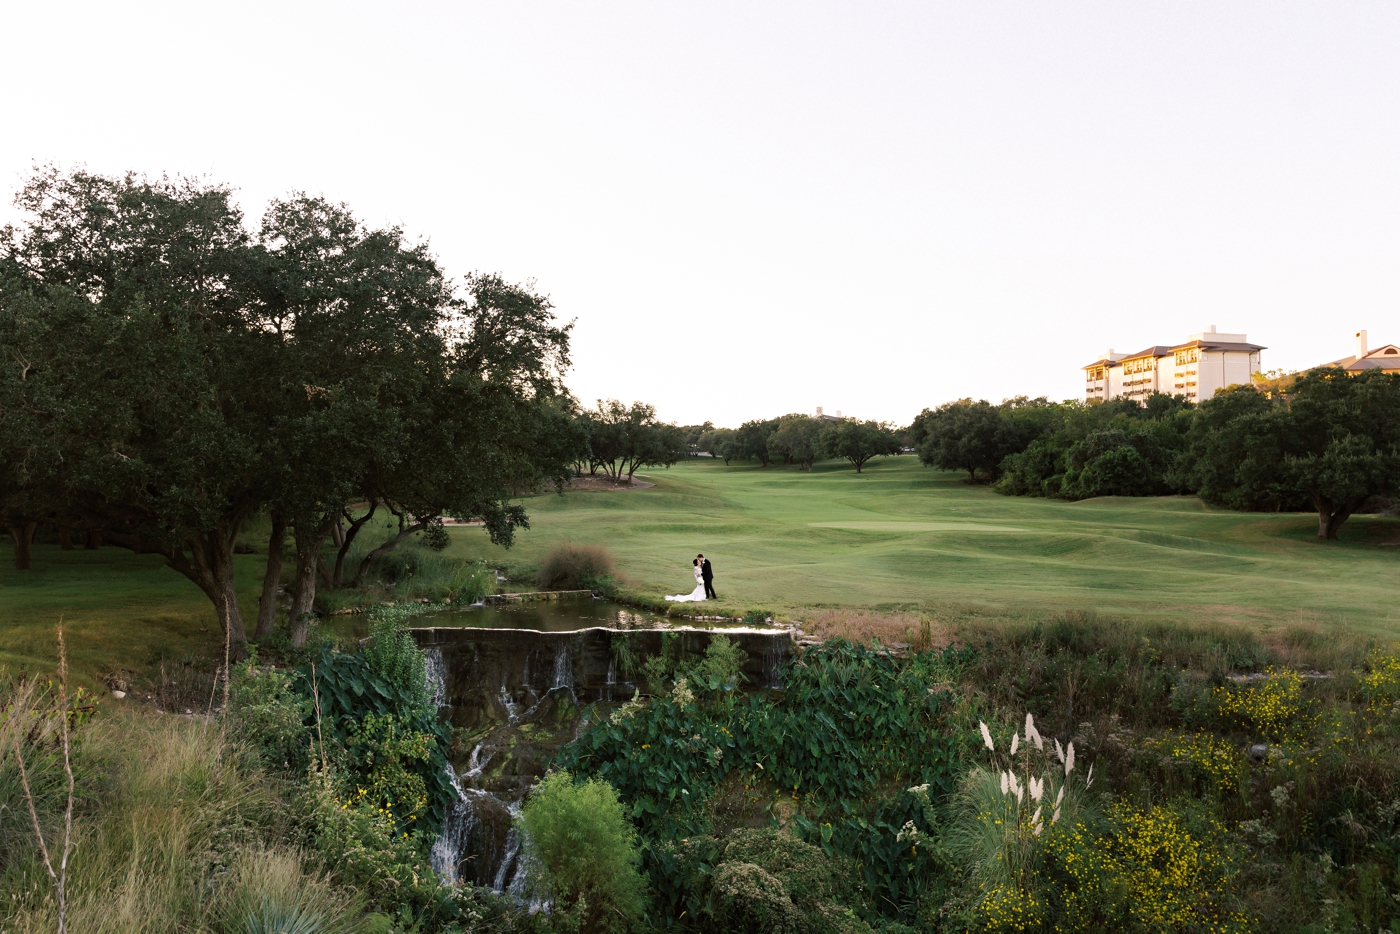 Bride and groom pictures on the golf course at sunset at Omni Barton Creek